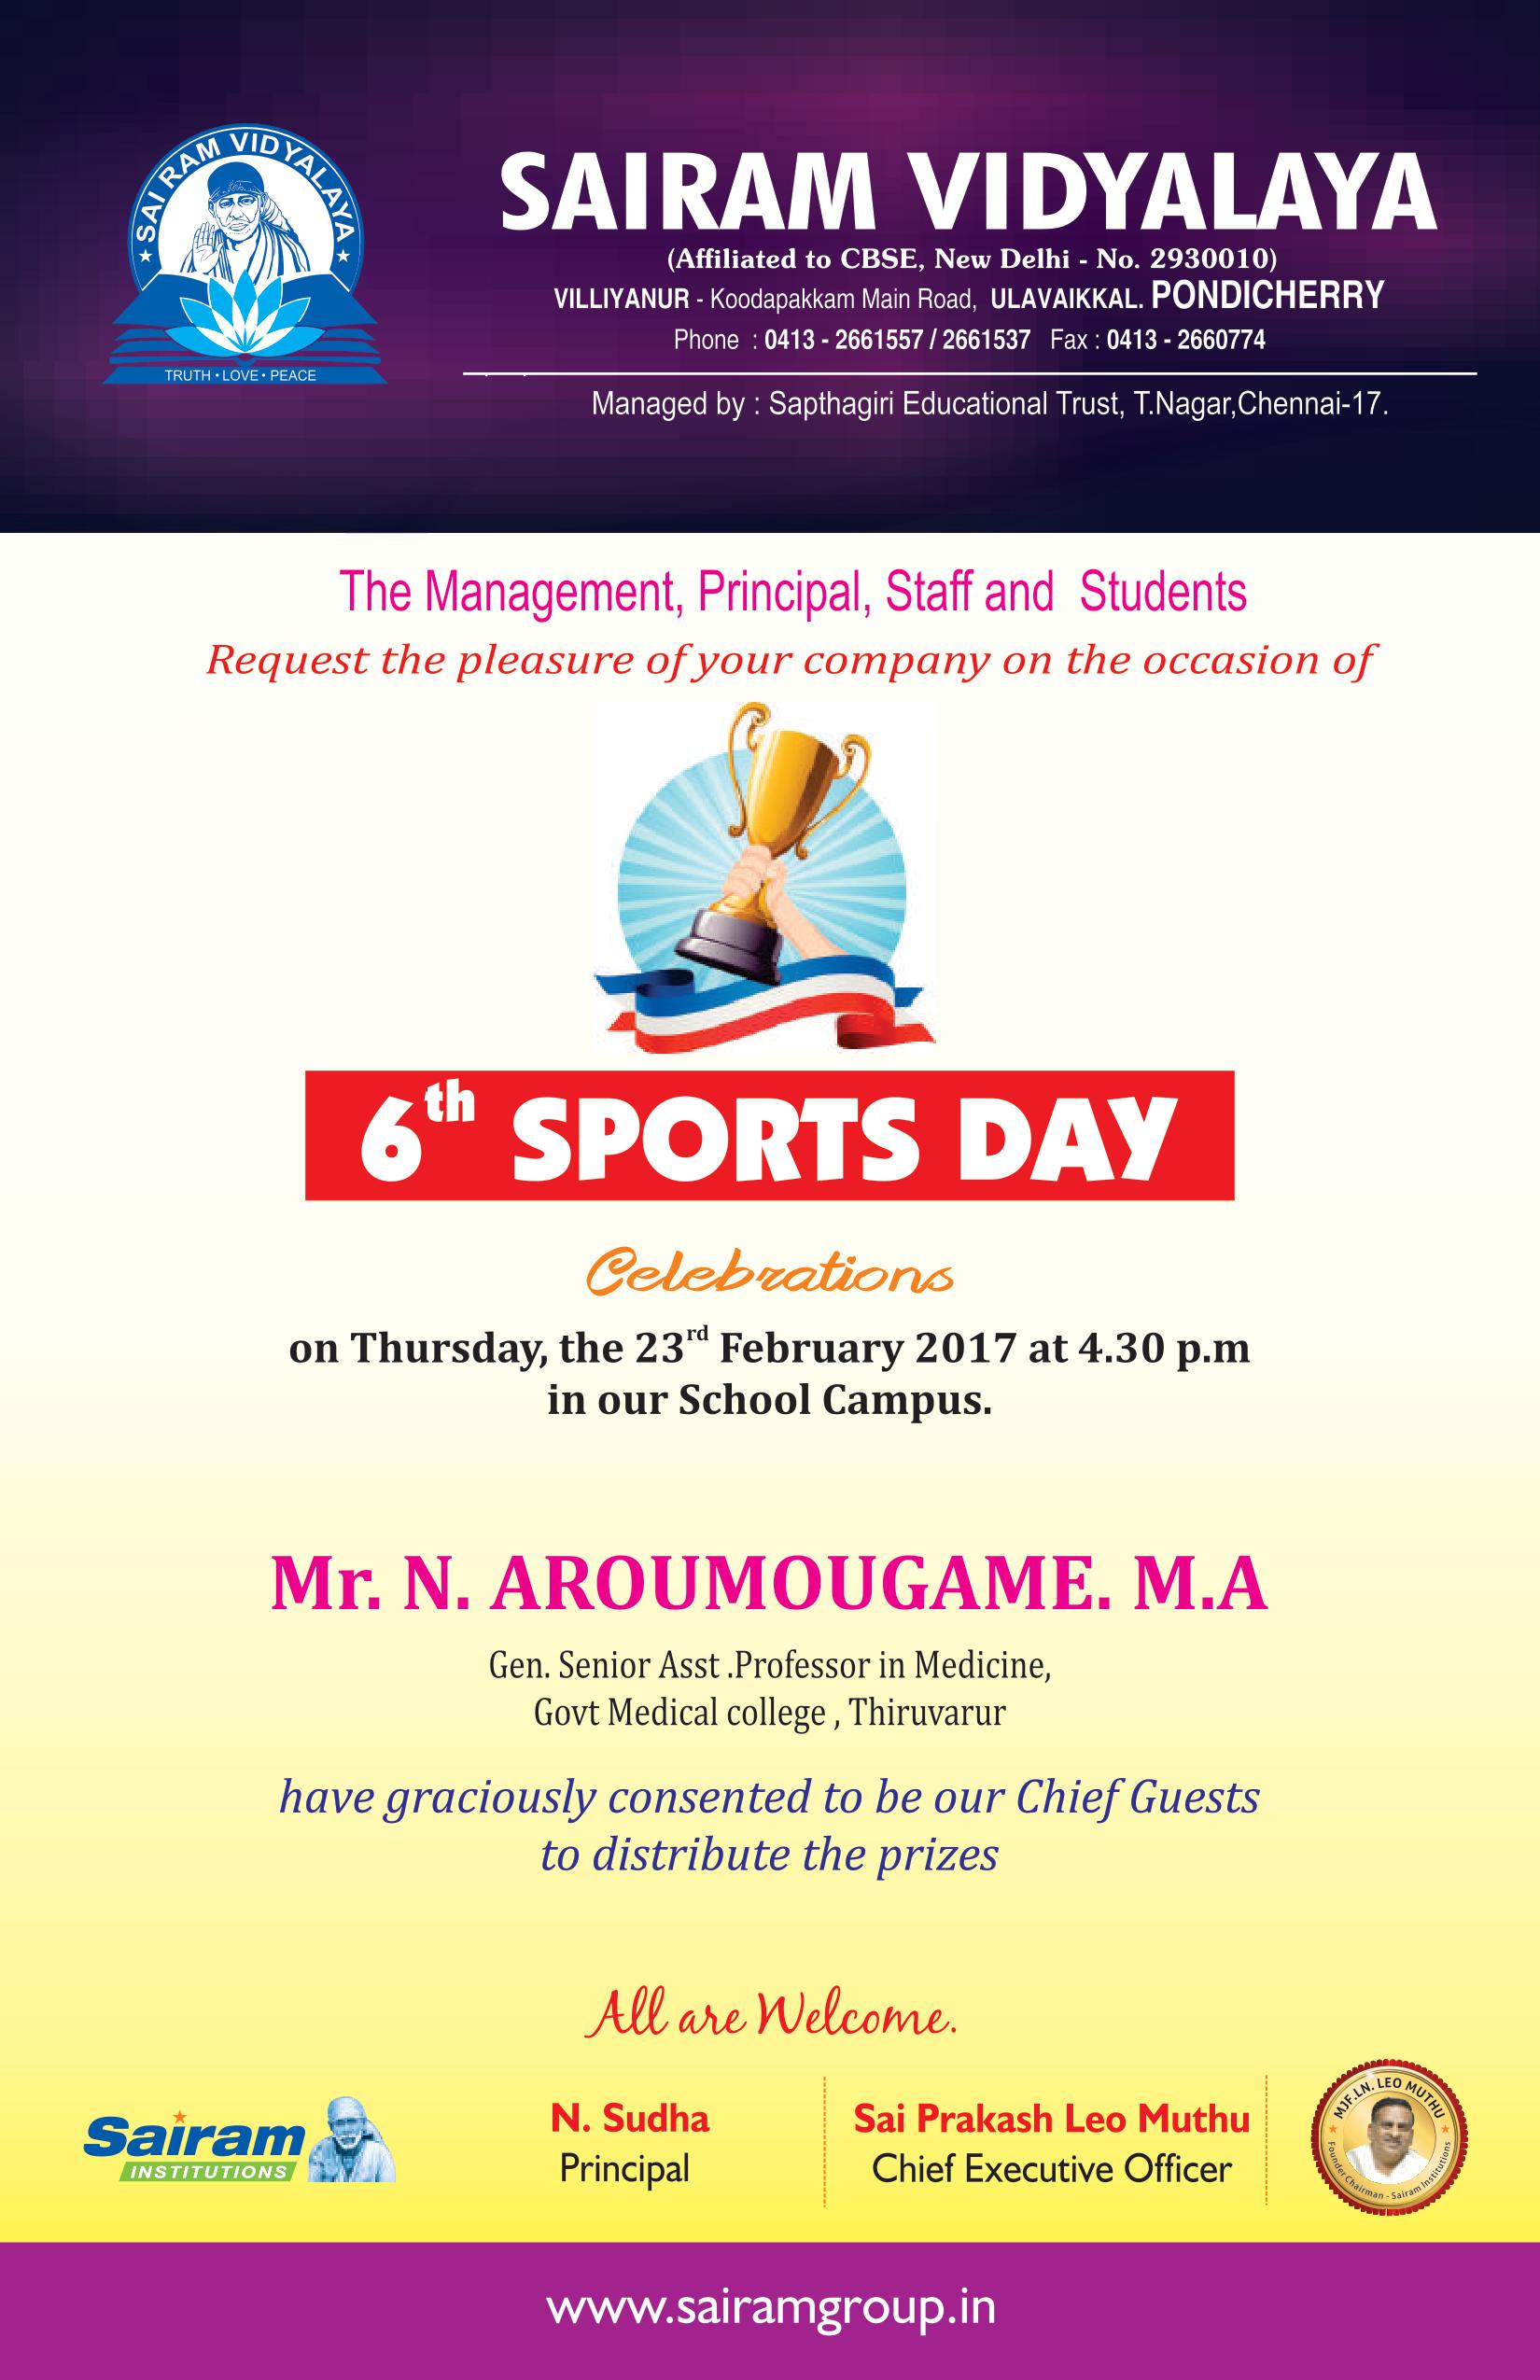 6th Sports day celebration on 23rd Feb, 2017 at our school campus